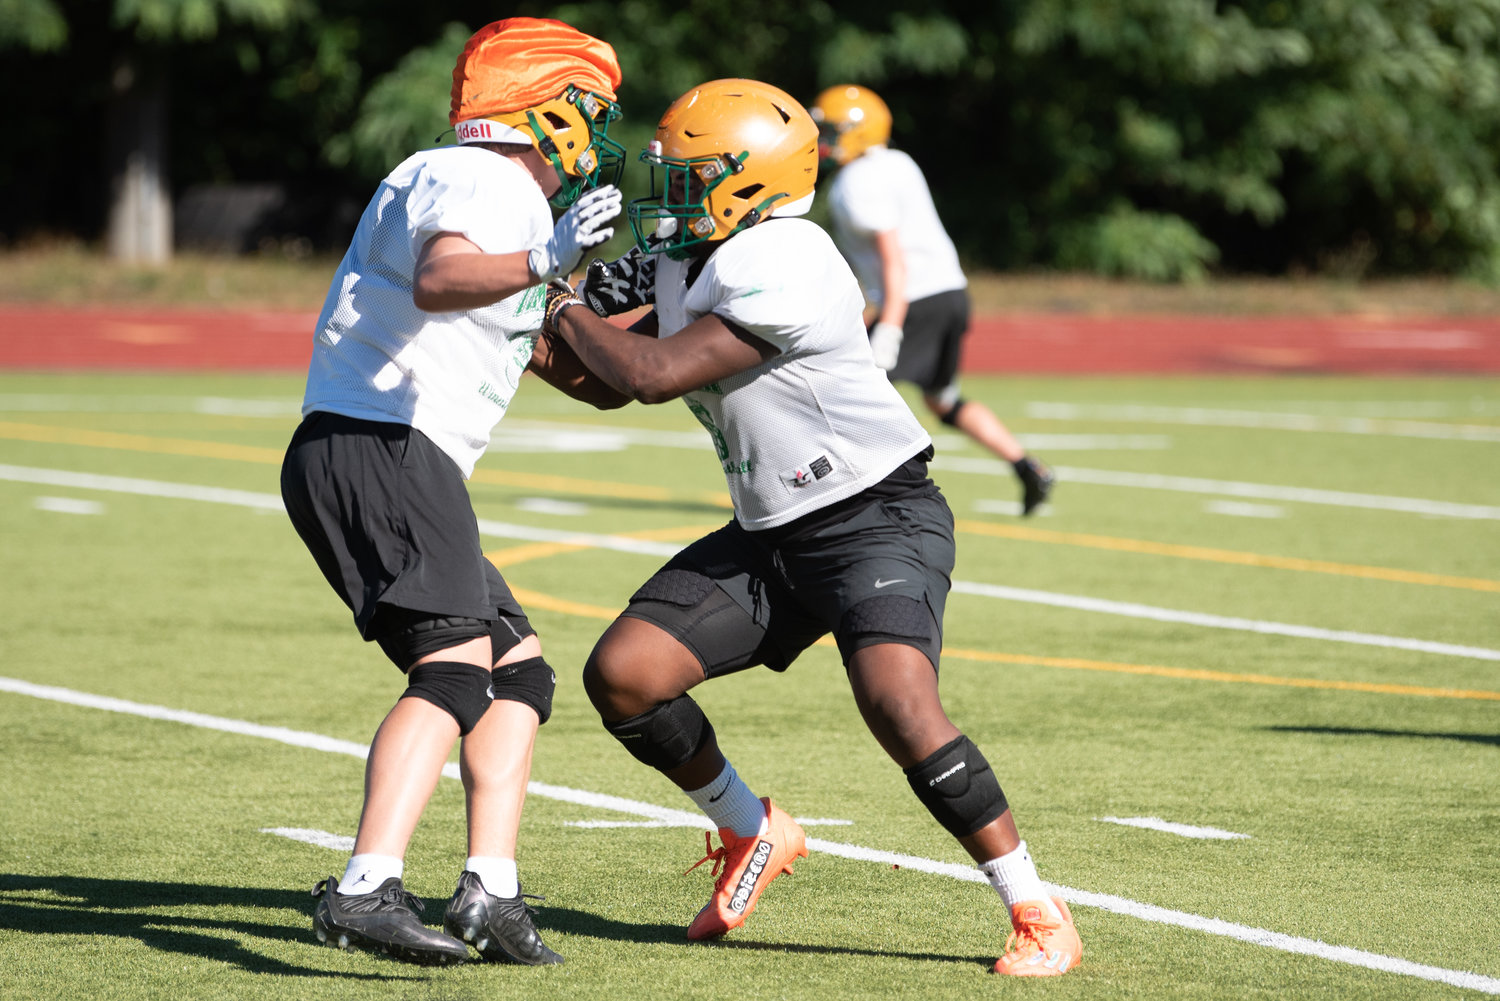 Tumwater's Carlos Matheney takes on a blocker during the T-Birds' practice on Aug. 22.